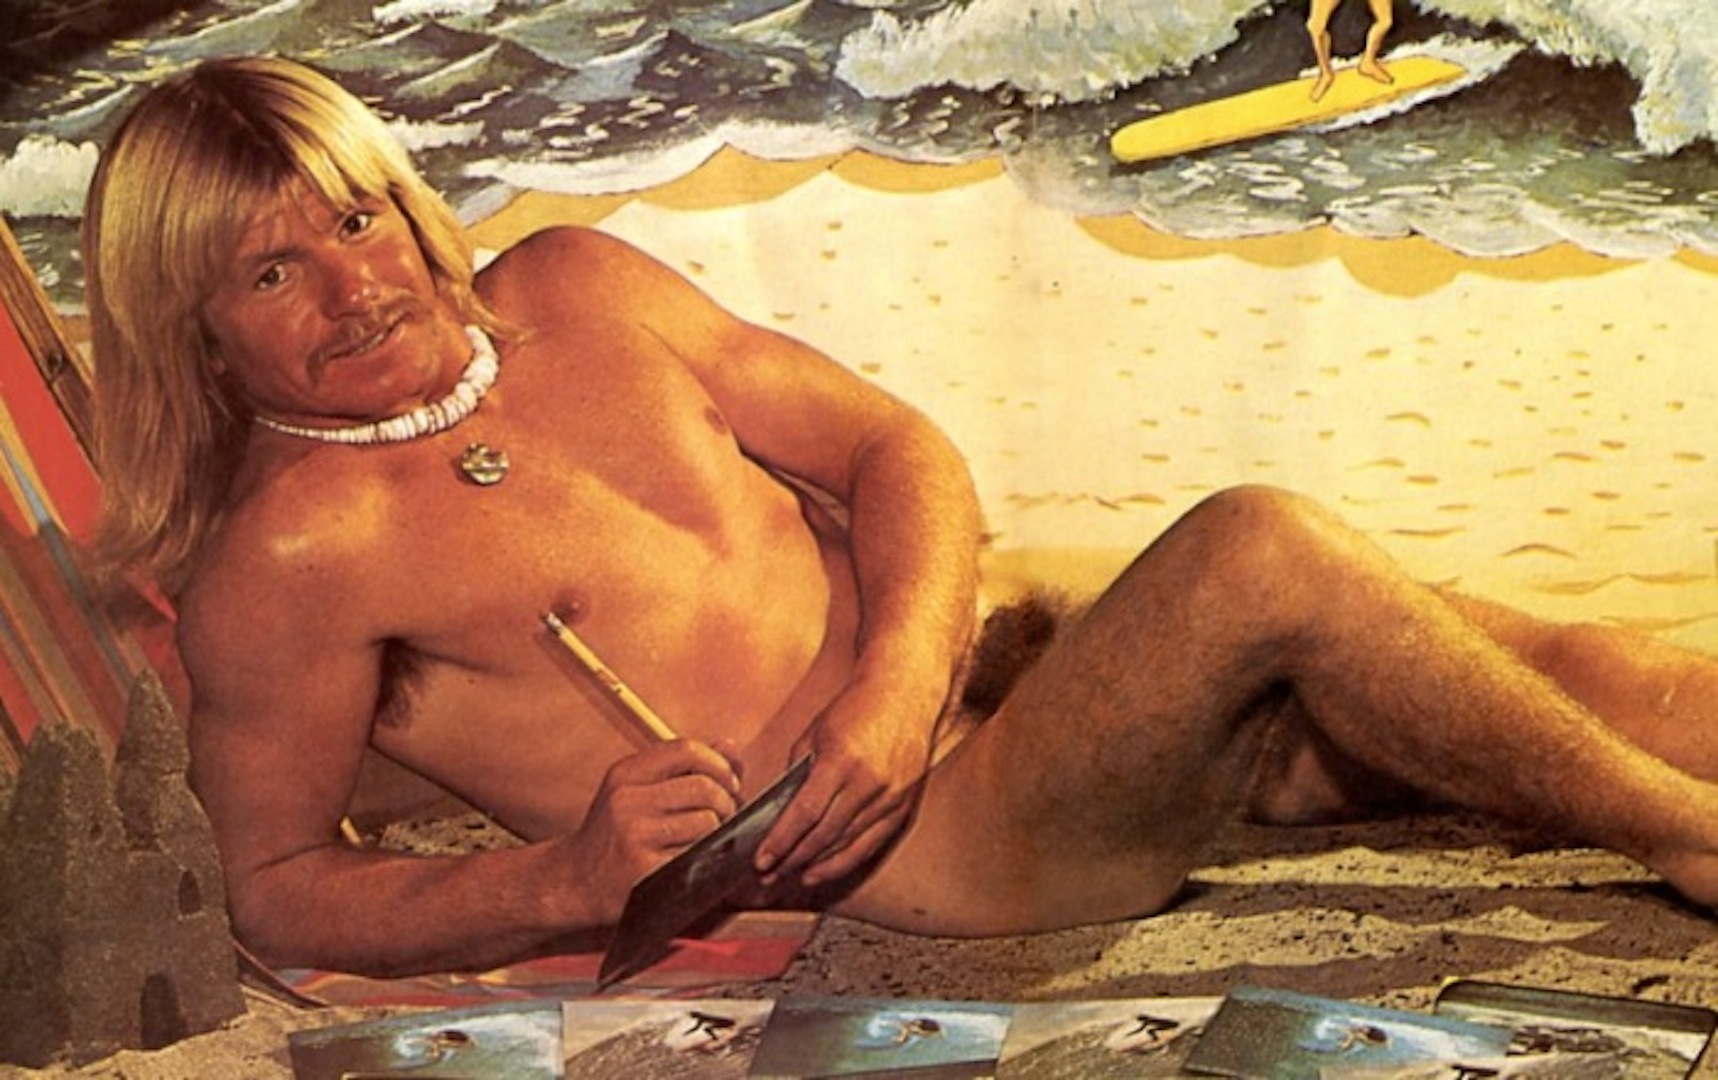 Topless Beach South Carolina - Graphic: Famous(ish) Surfers Who Posed Nude! | BeachGrit